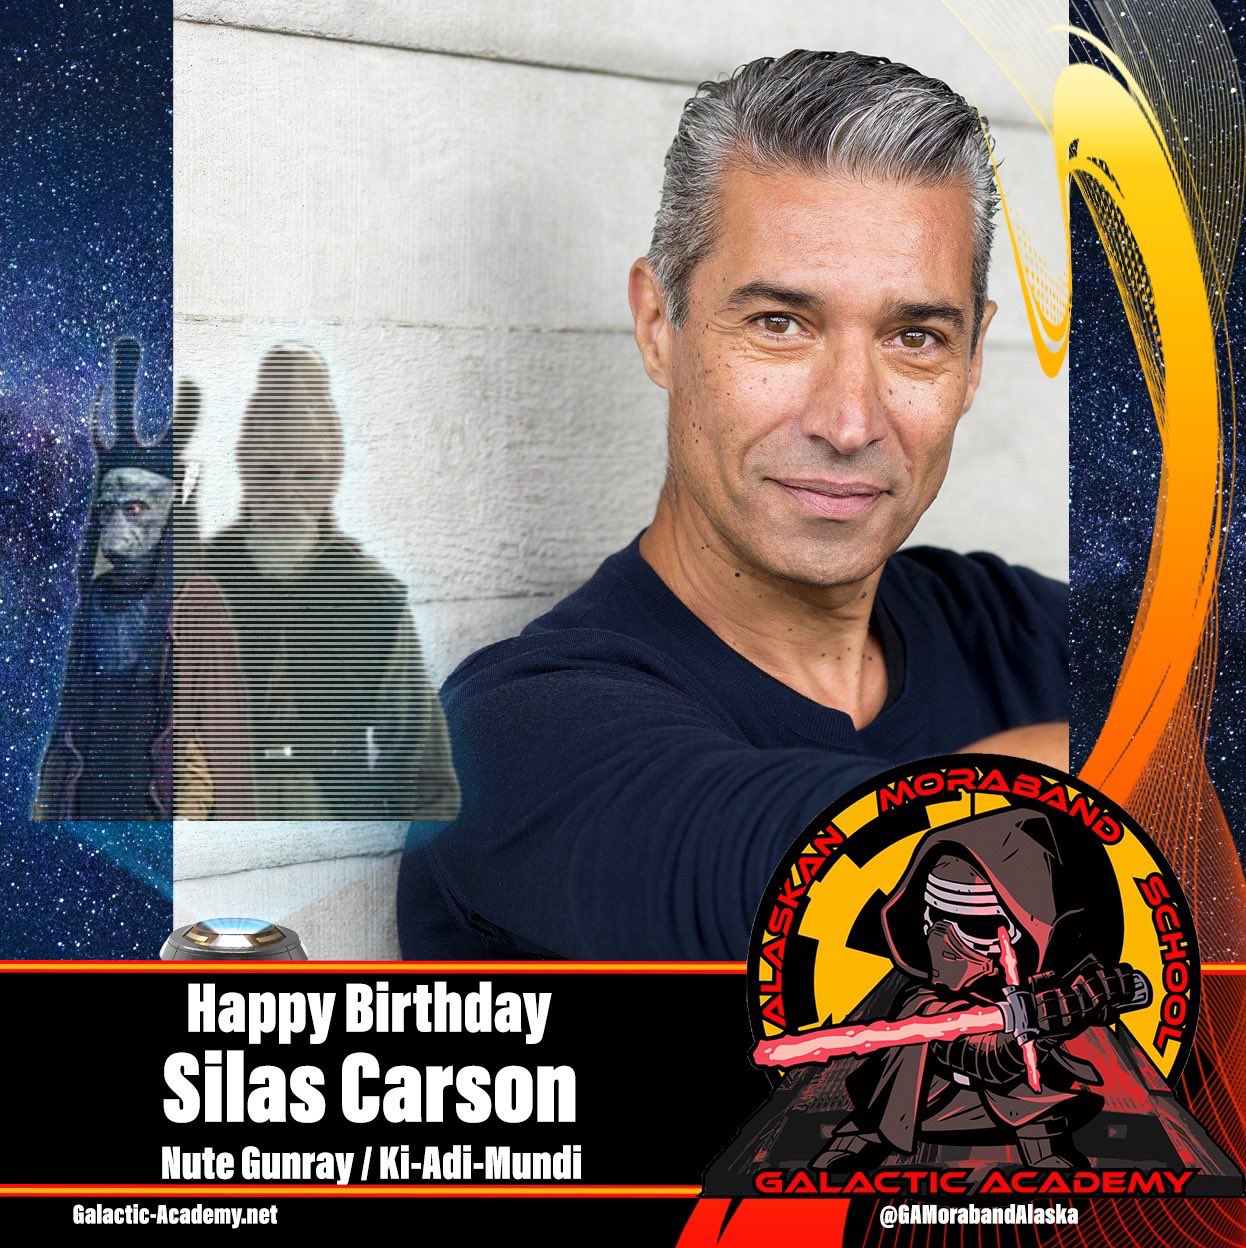 The Alaskan Moraband School would like to wish Silas Carson a very happy birthday!   